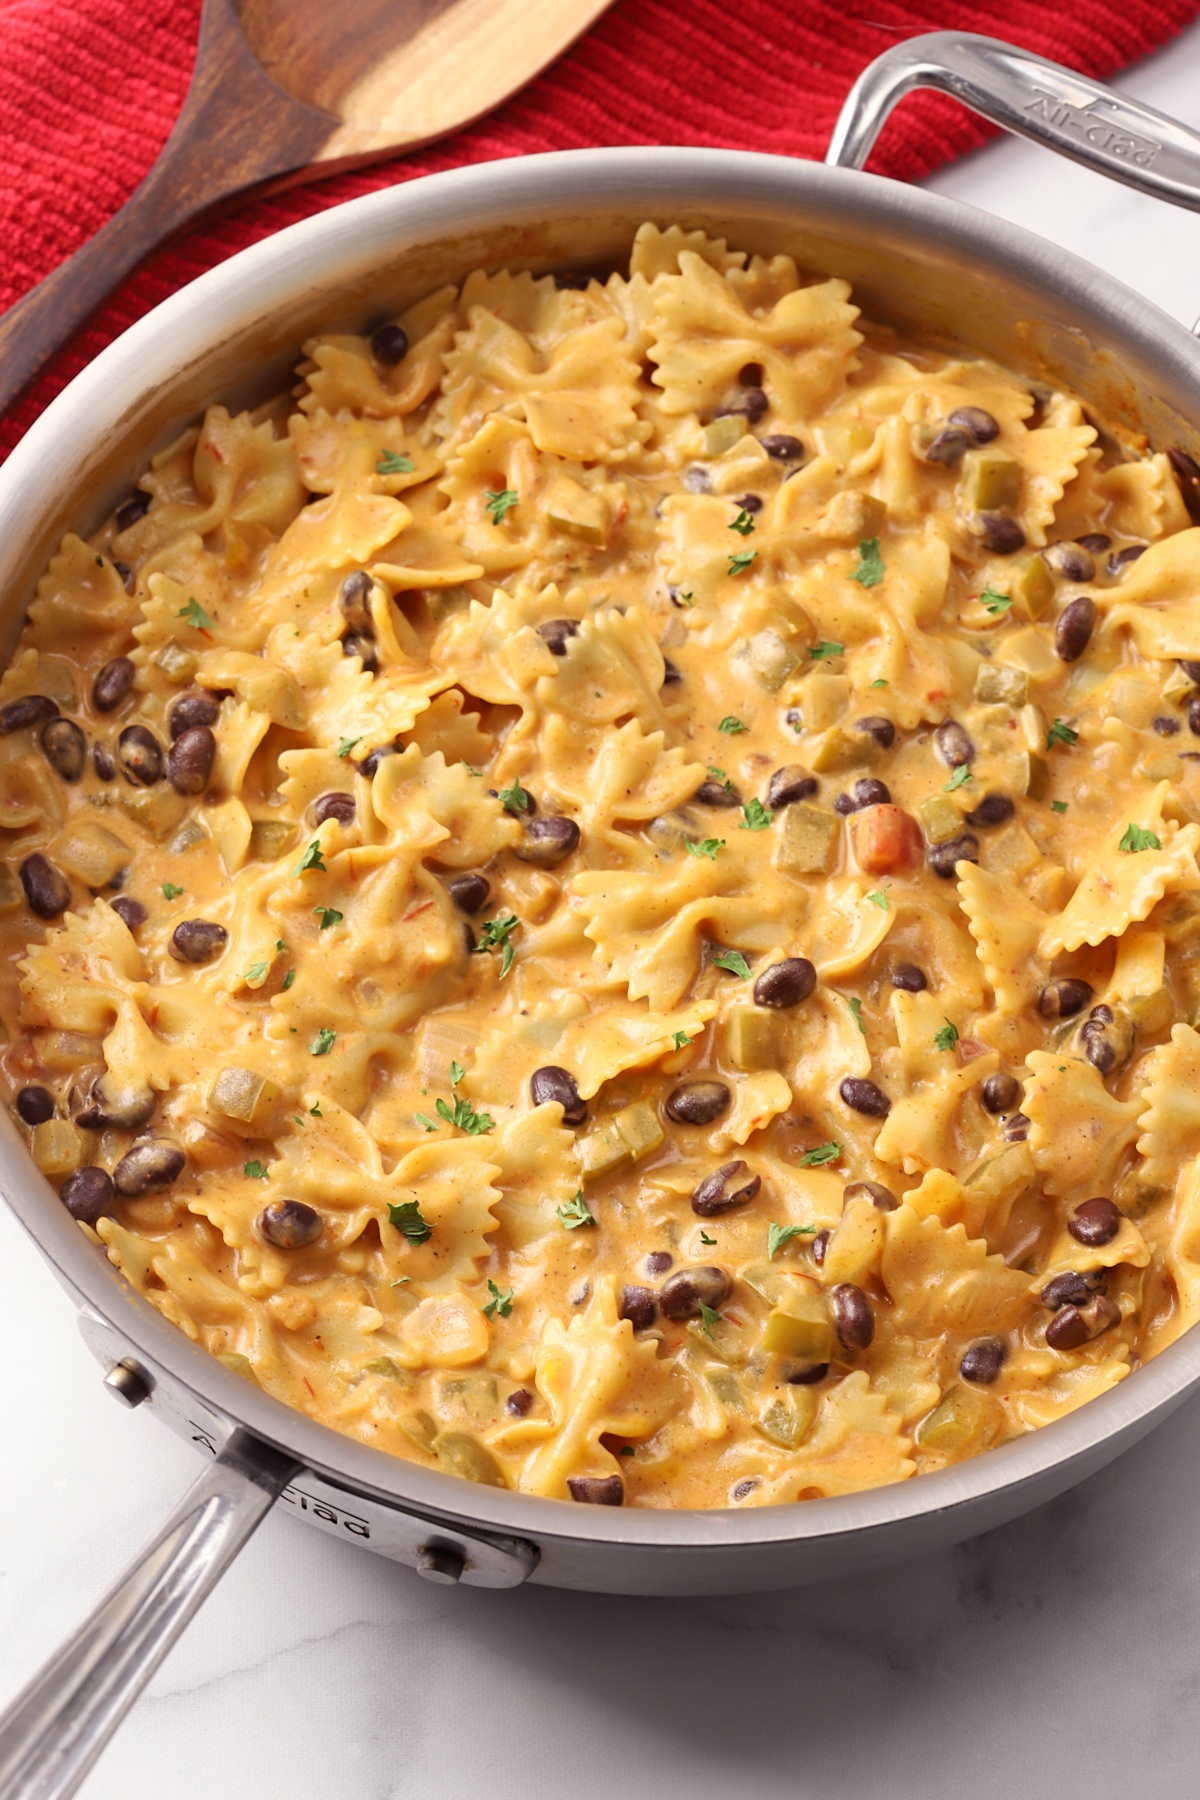 A saute pan filled with bow tie pasta and black beans.